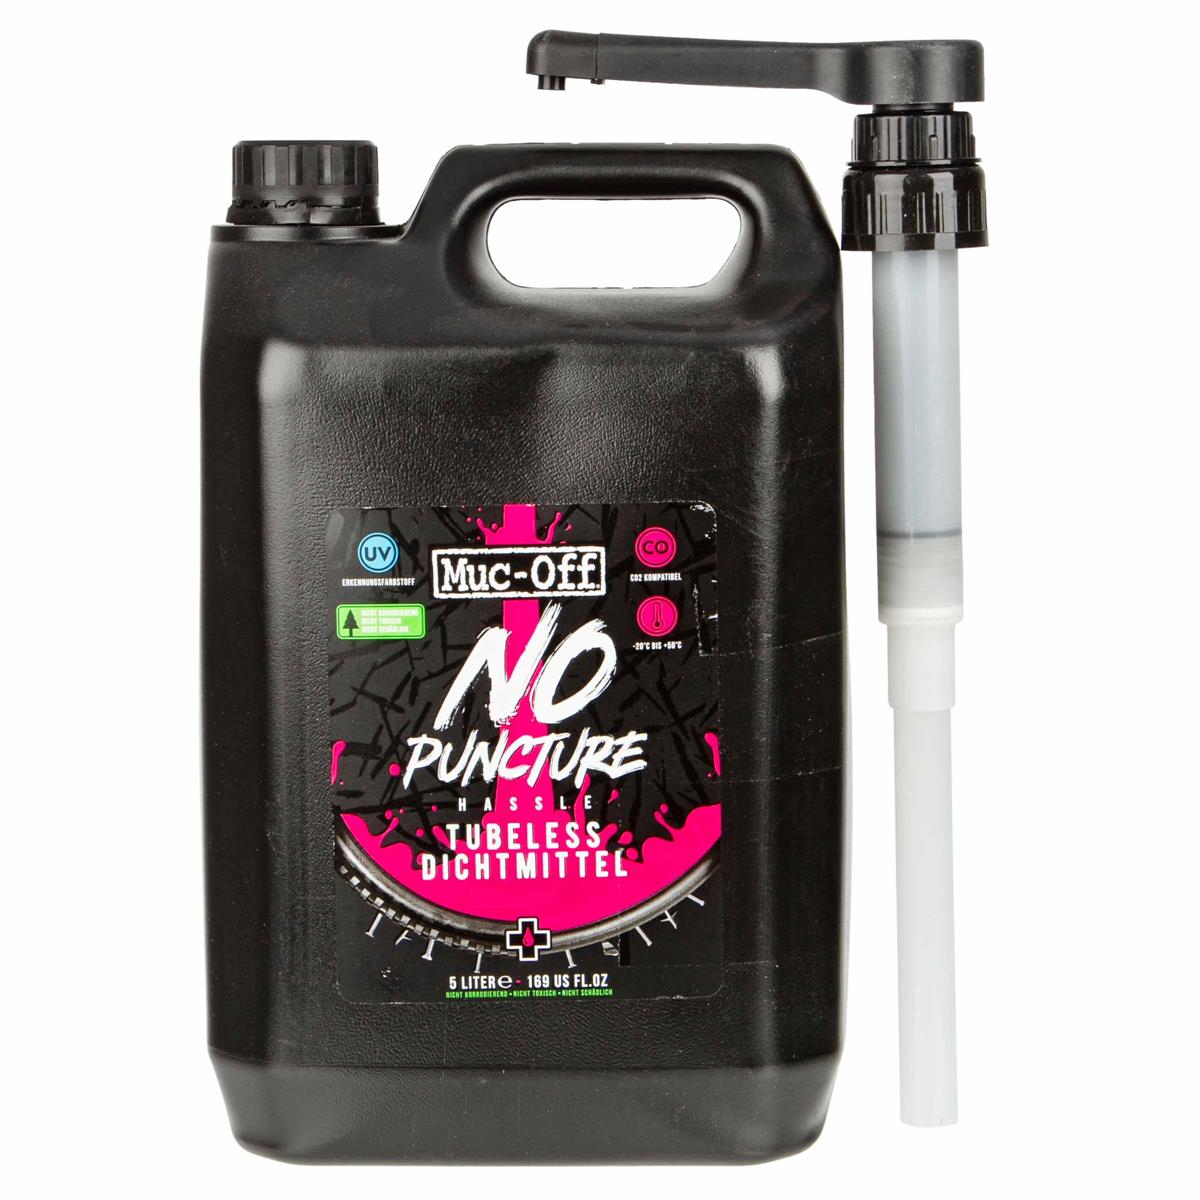 Muc-Off Tubeless Sealant No Puncture Hassle 5 L